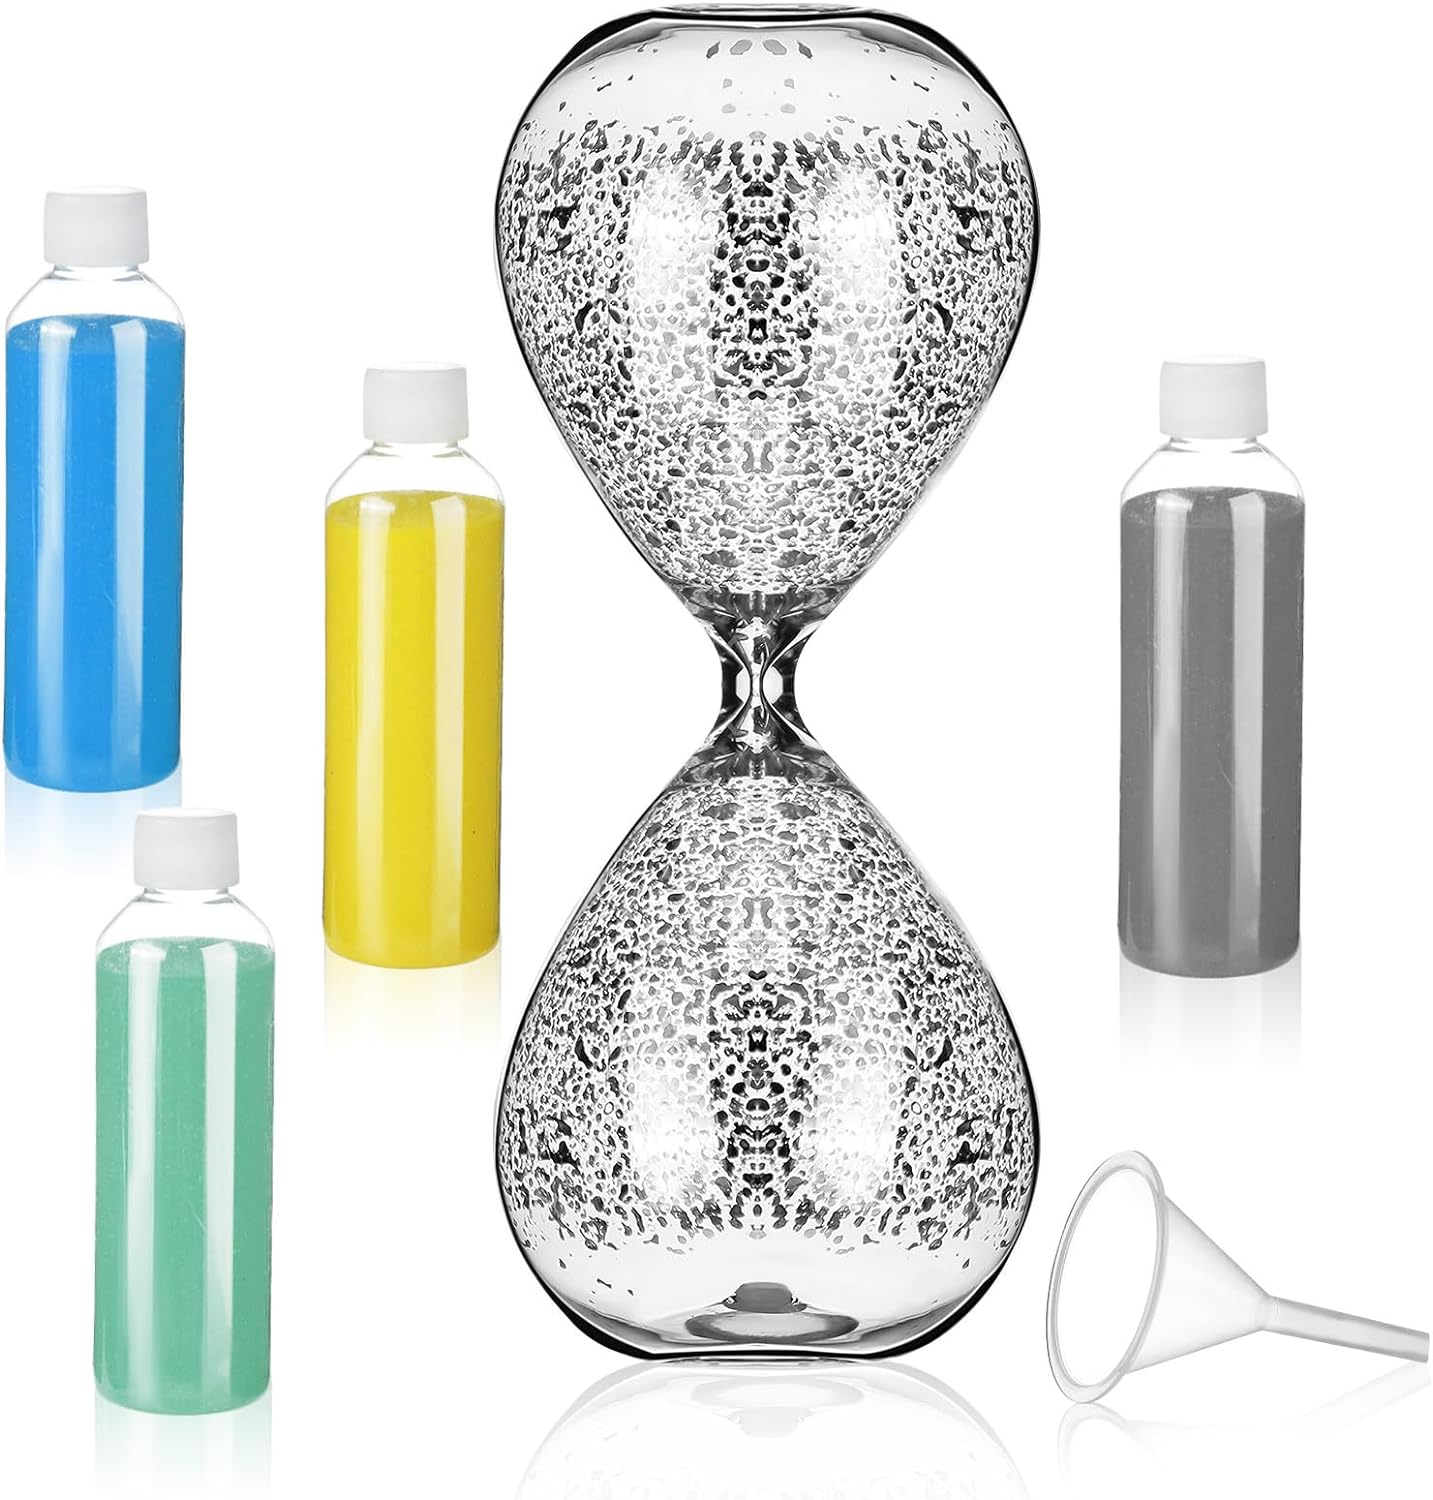 8.25x3.25 Inches Decorative DIY Sand Timer with 4 Tubes